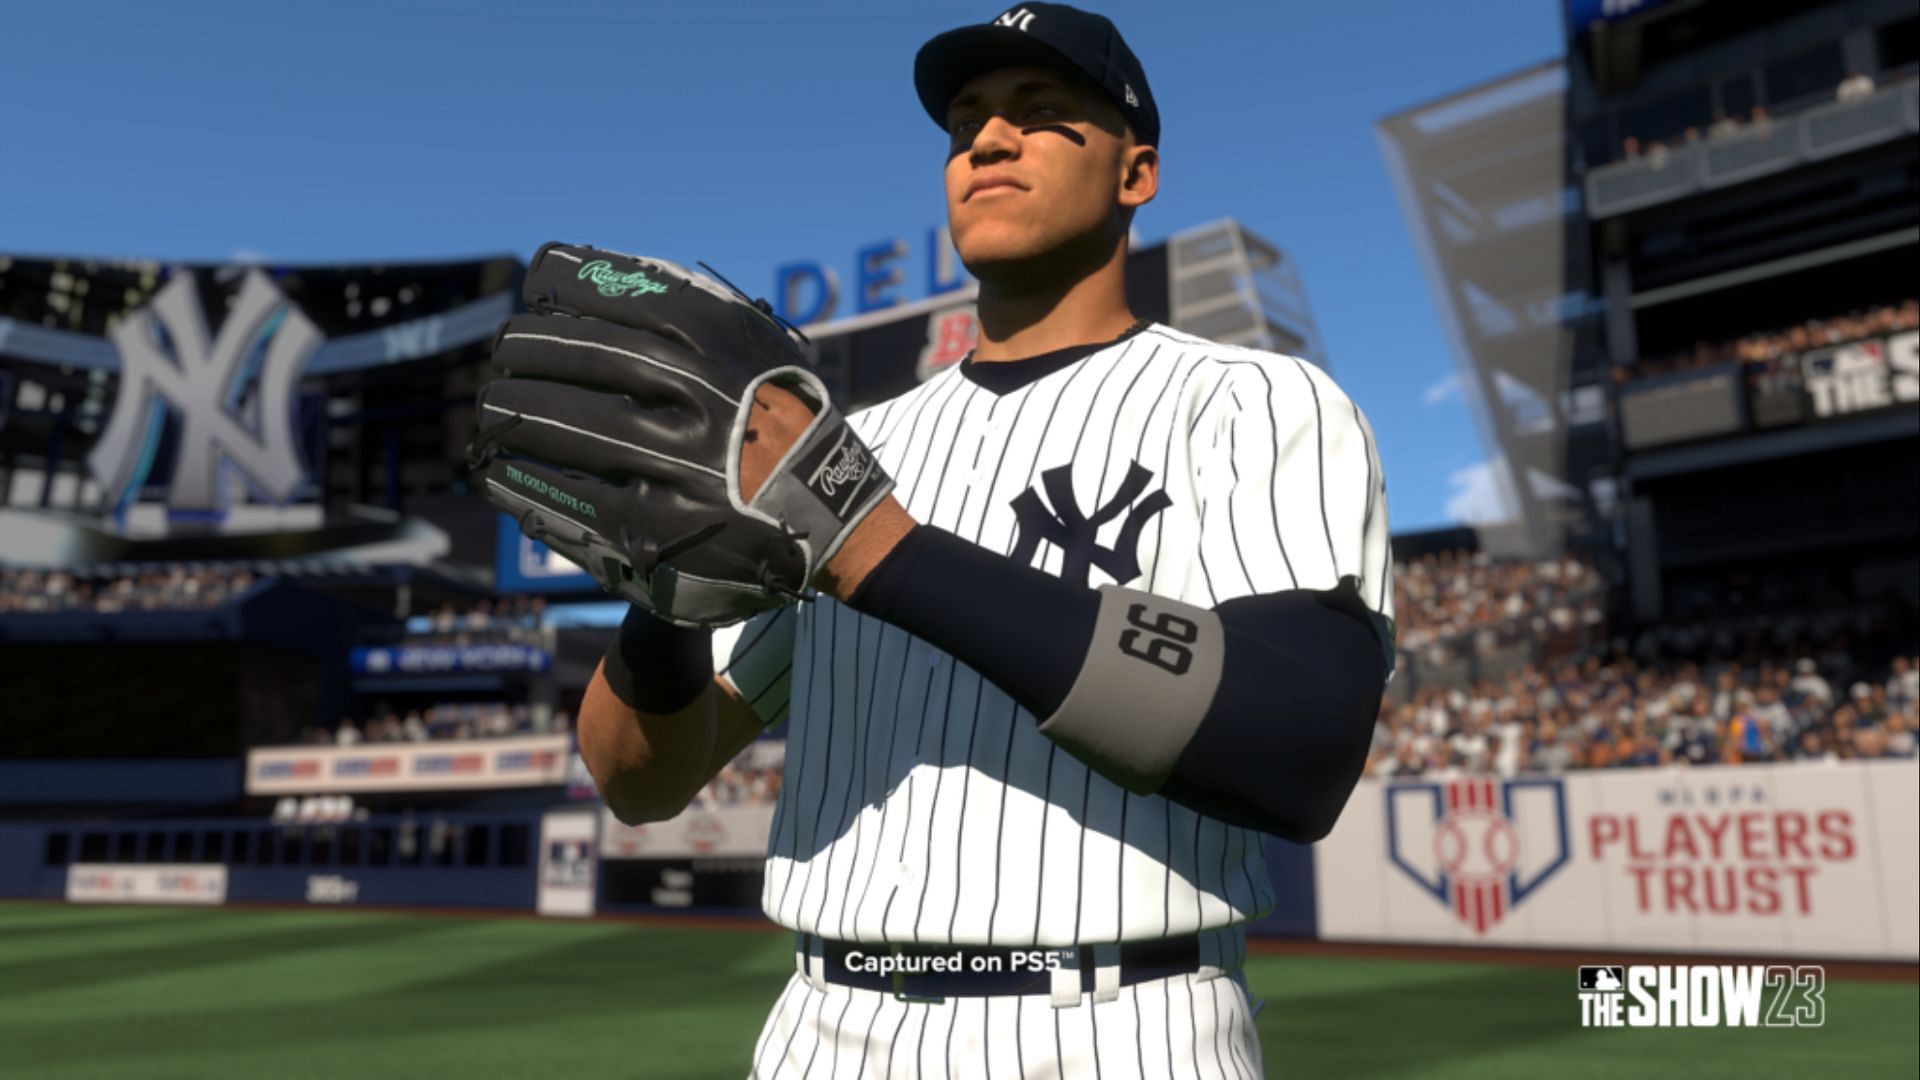 RTTS MLB The Show 23 RTTS mode guide How to improve your ballplayer's